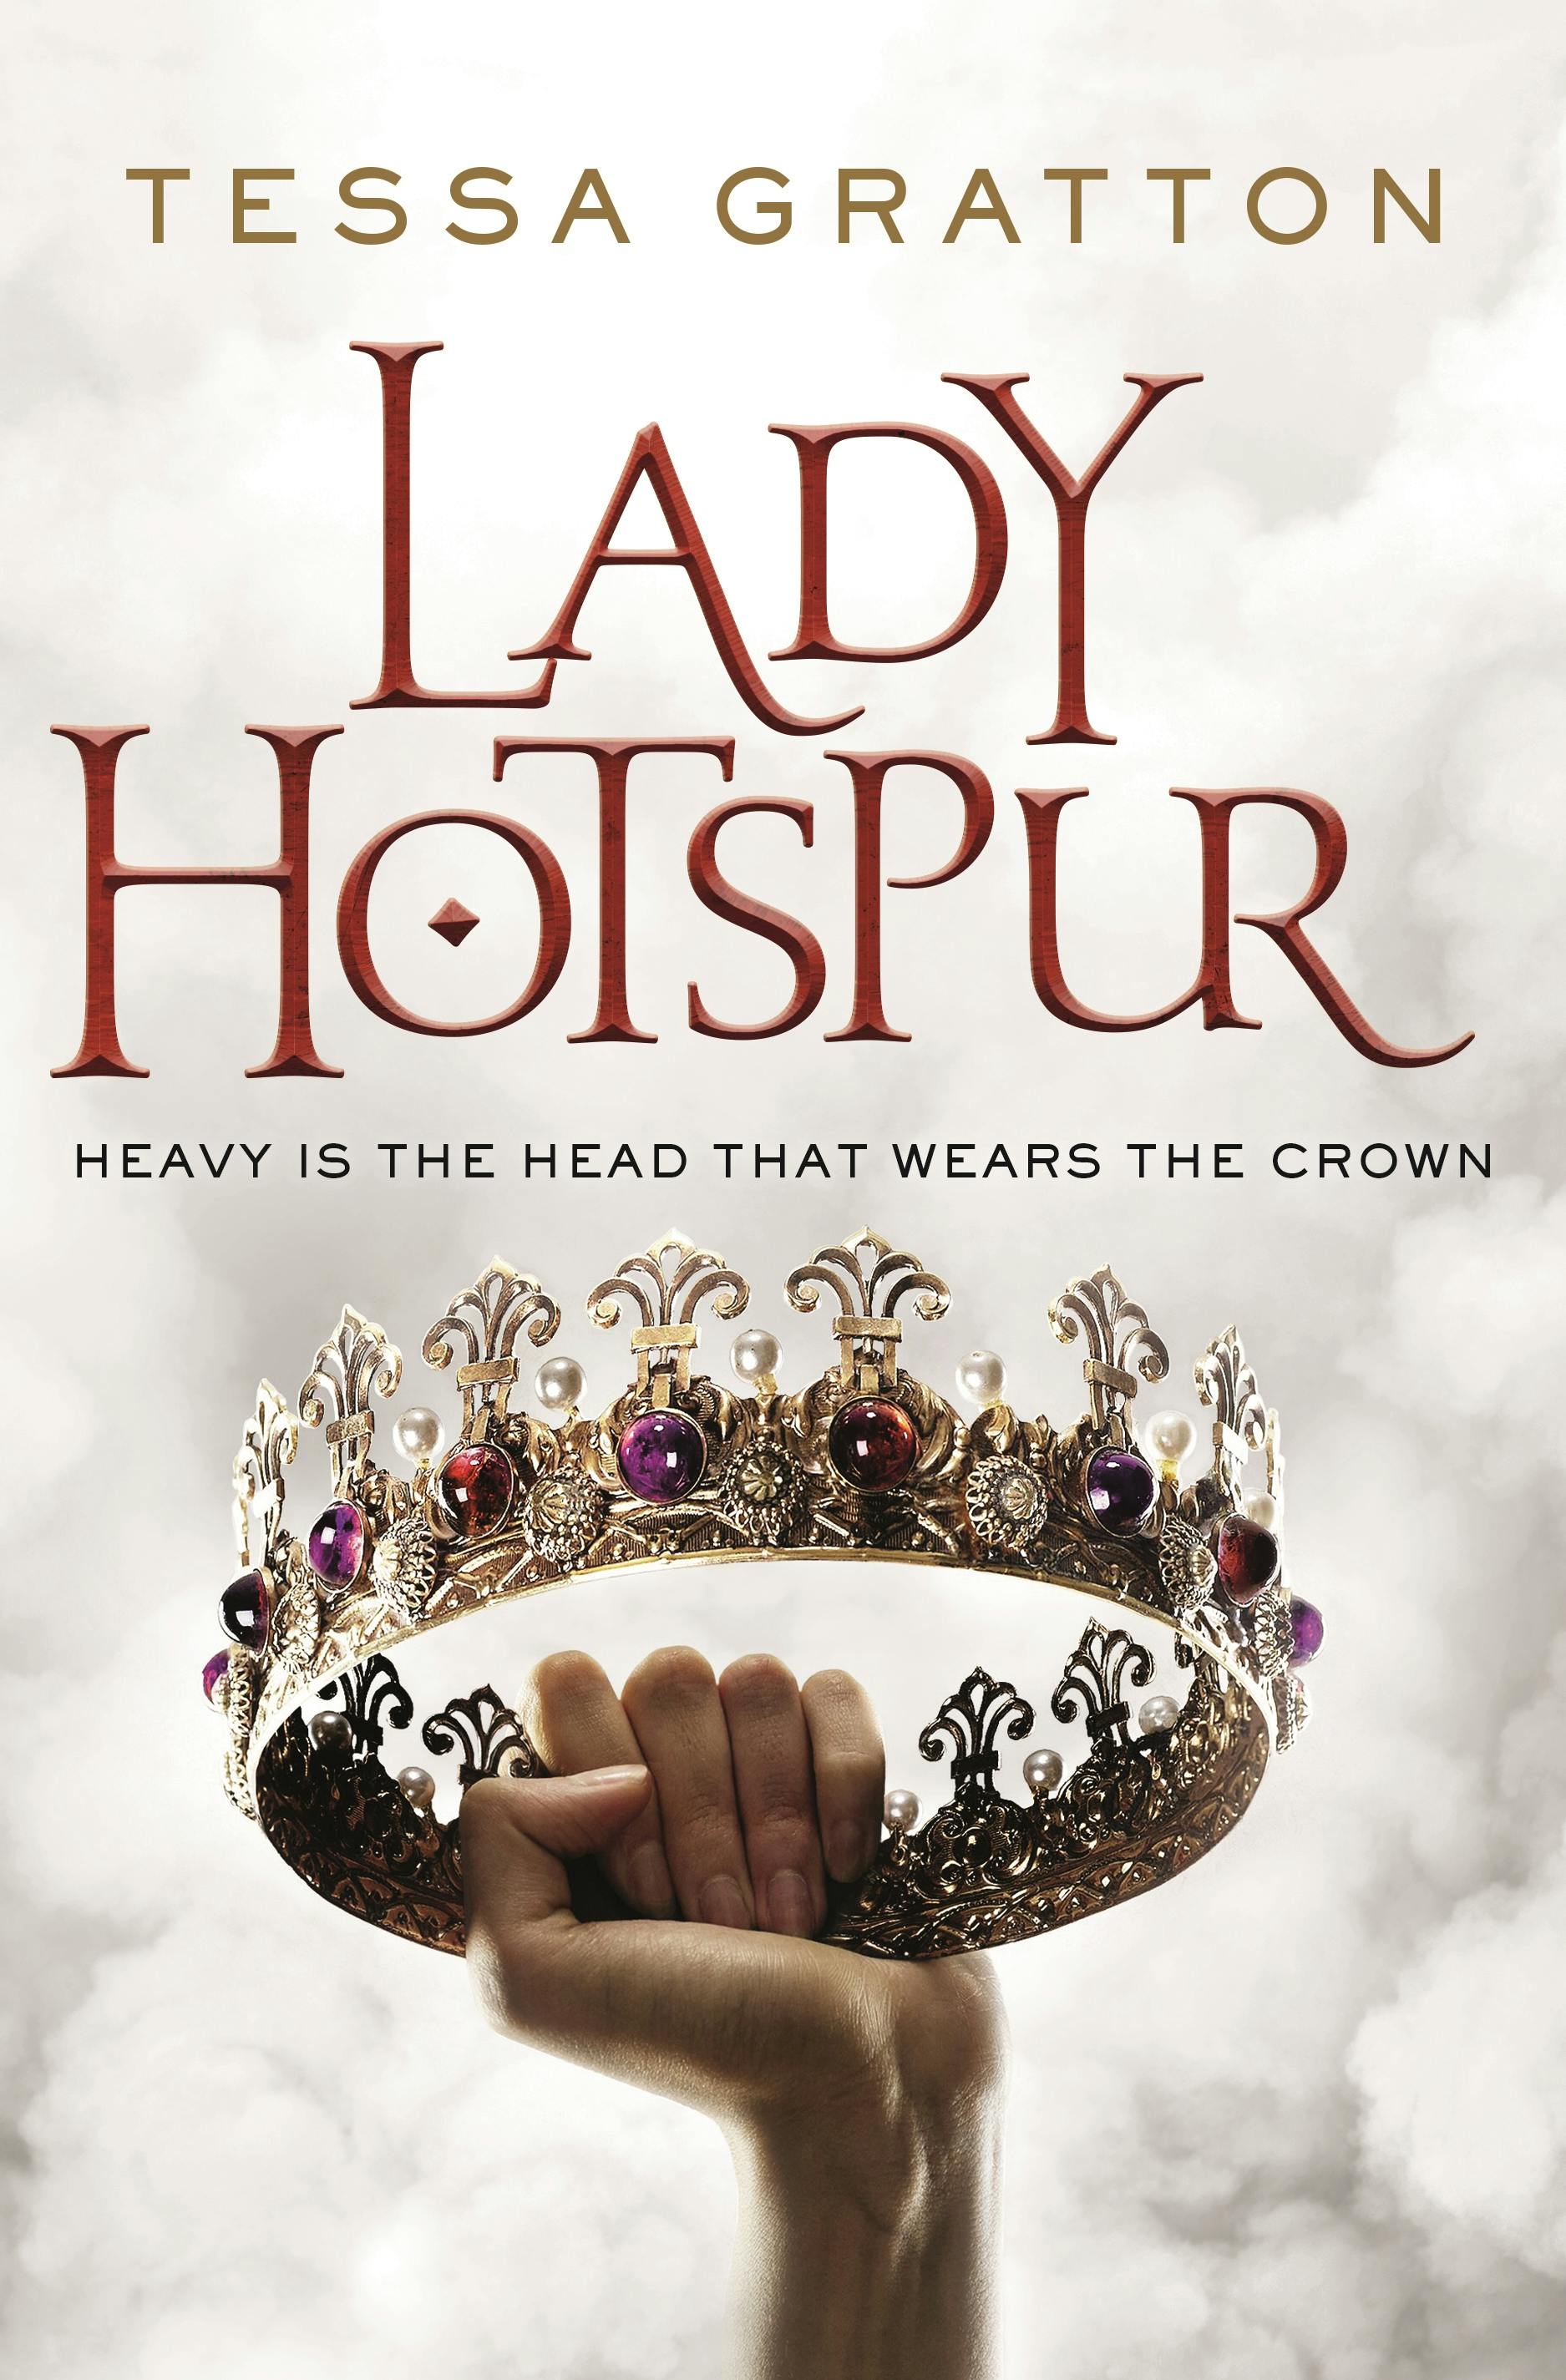 Cover for the book titled as: Lady Hotspur